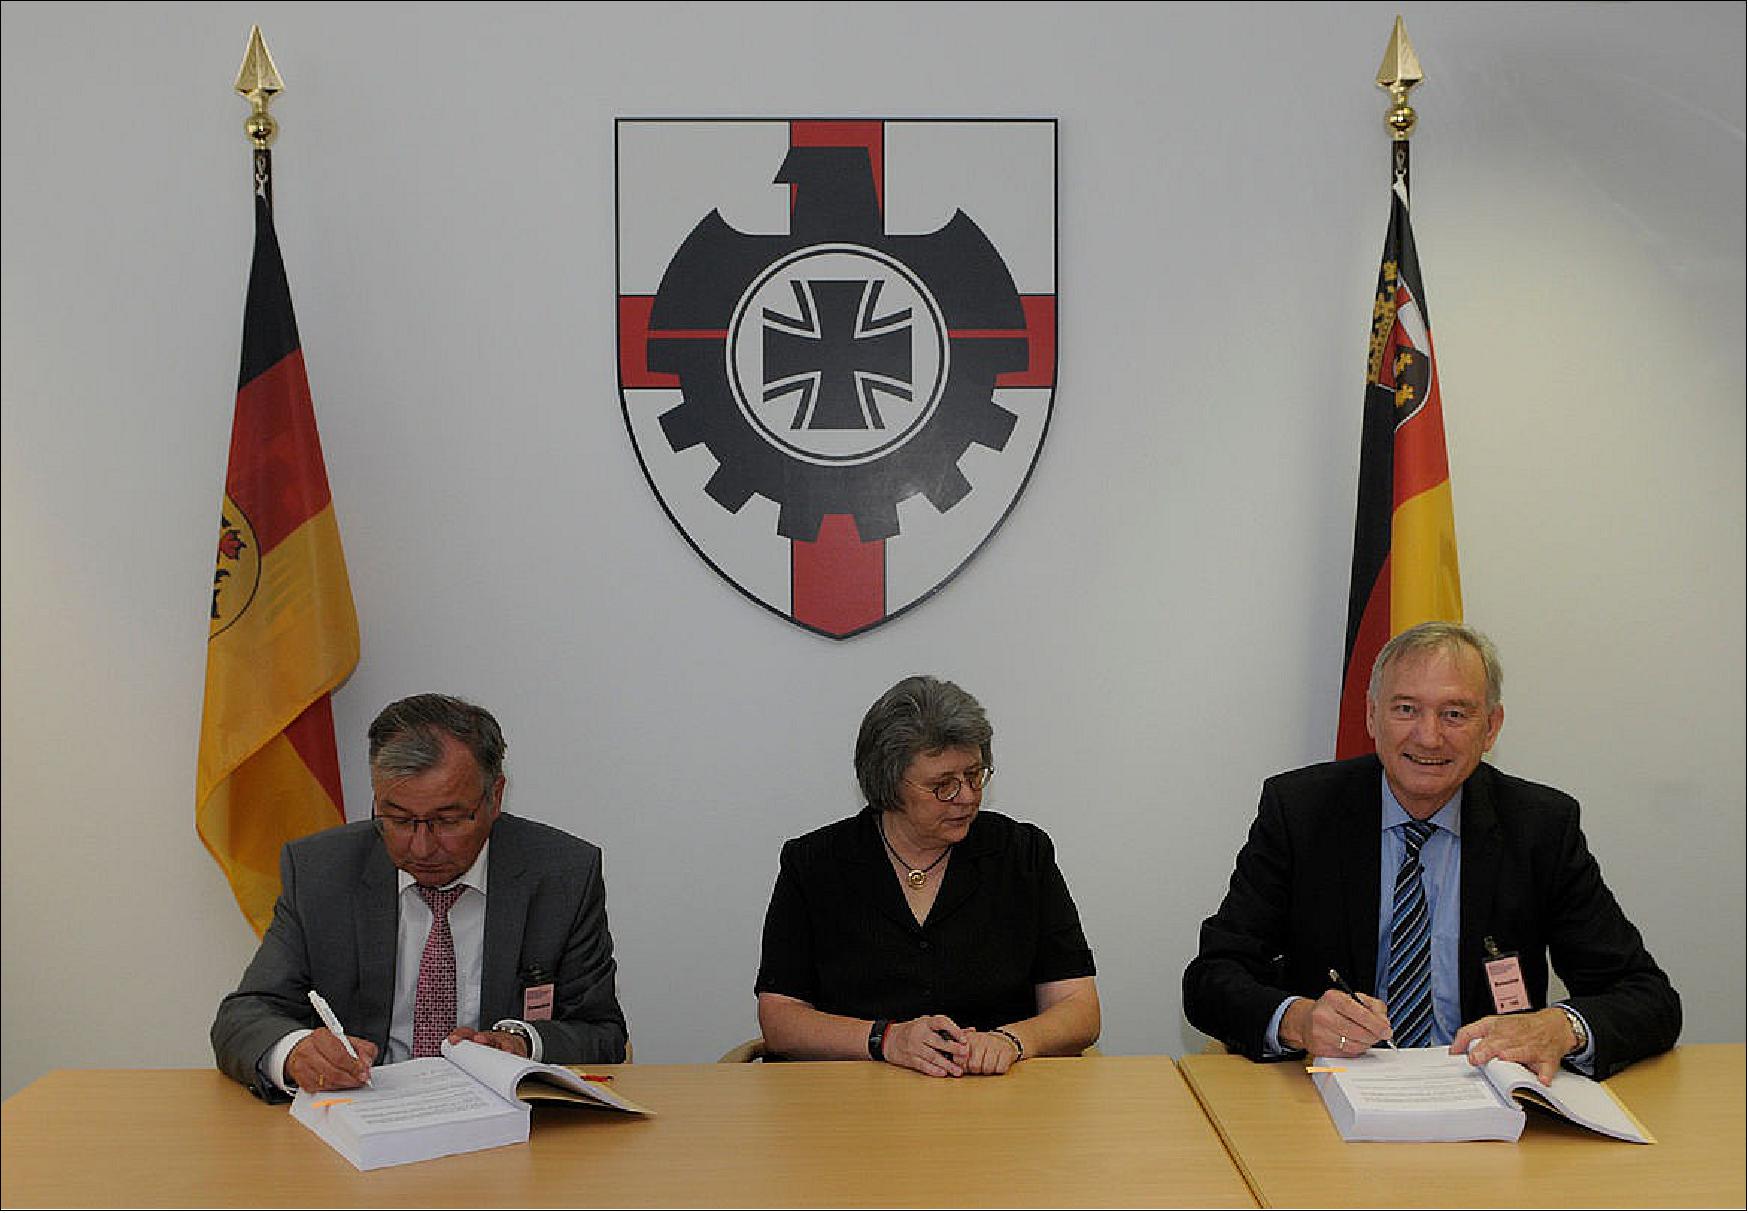 Figure 5: Kurt Melching, Member of the Management Board of OHB System AG, Kornelia Lehnigk-Emden, Deputy Vice President BAAINBw and Dr. Ingo Engeln, Member of the Management Board of OHB System AG at the signing of the contract in Koblenz (image credit: BAAINBw)